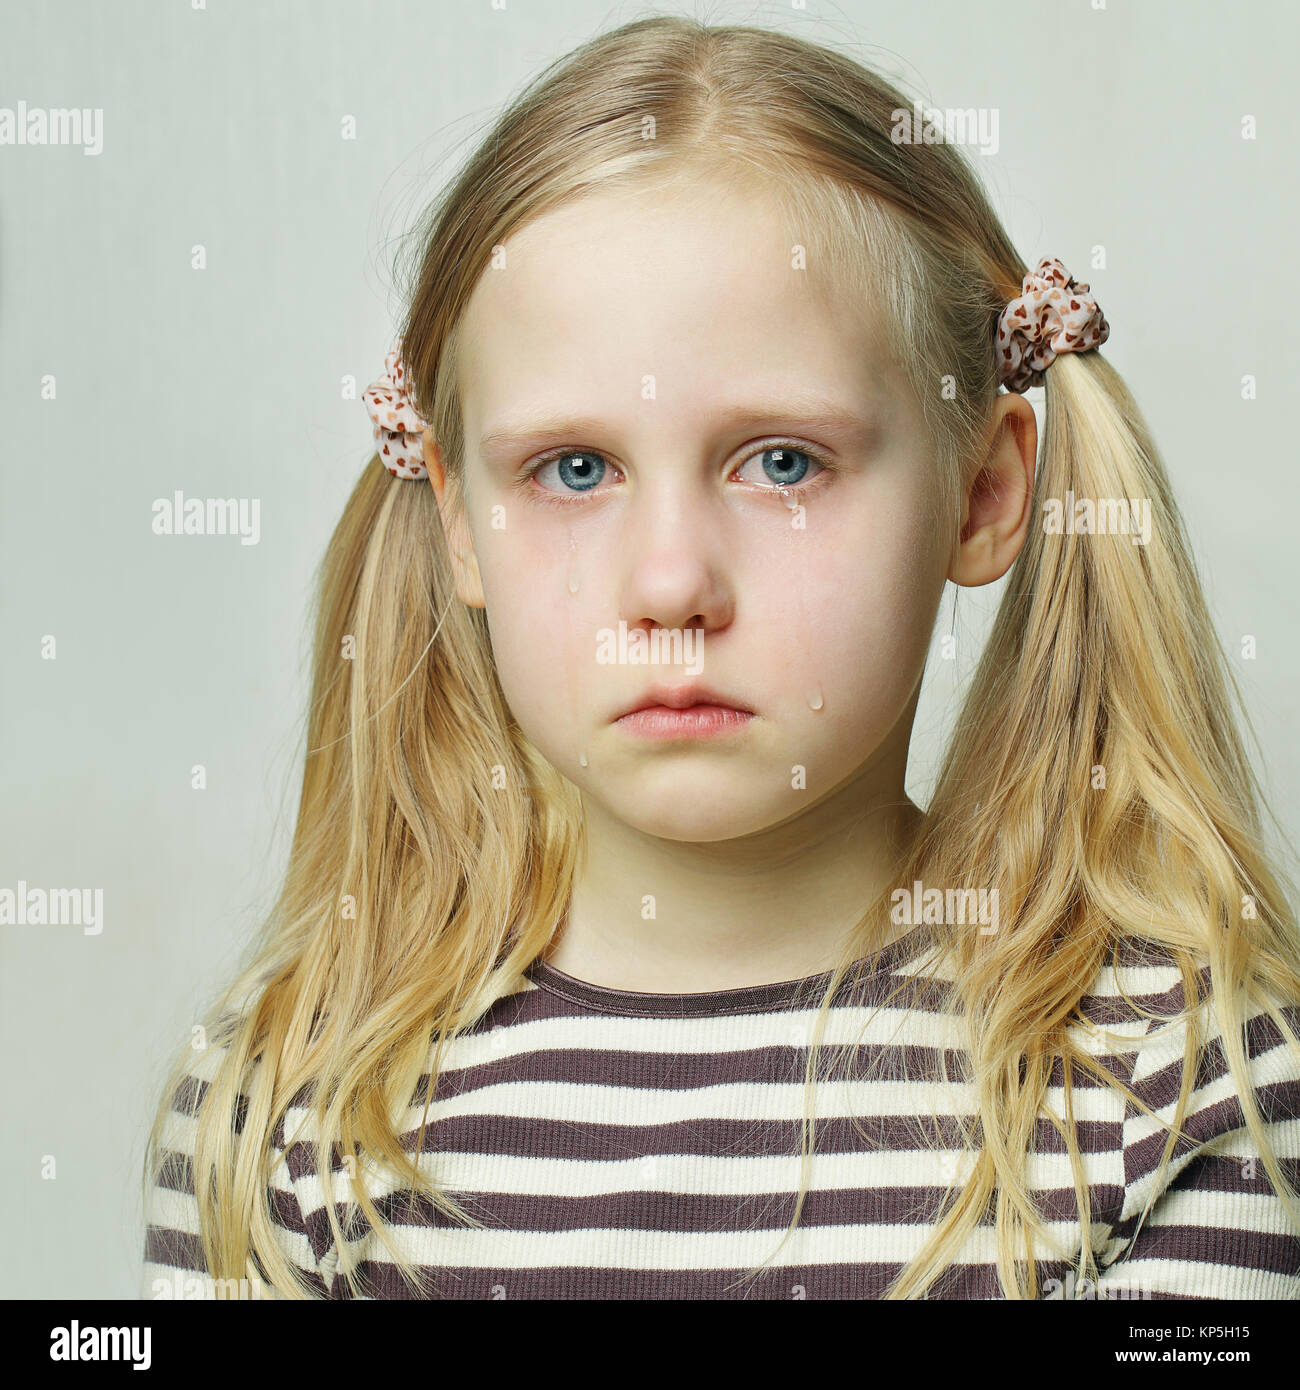 Little girl with sad expression and tears Stock Photo